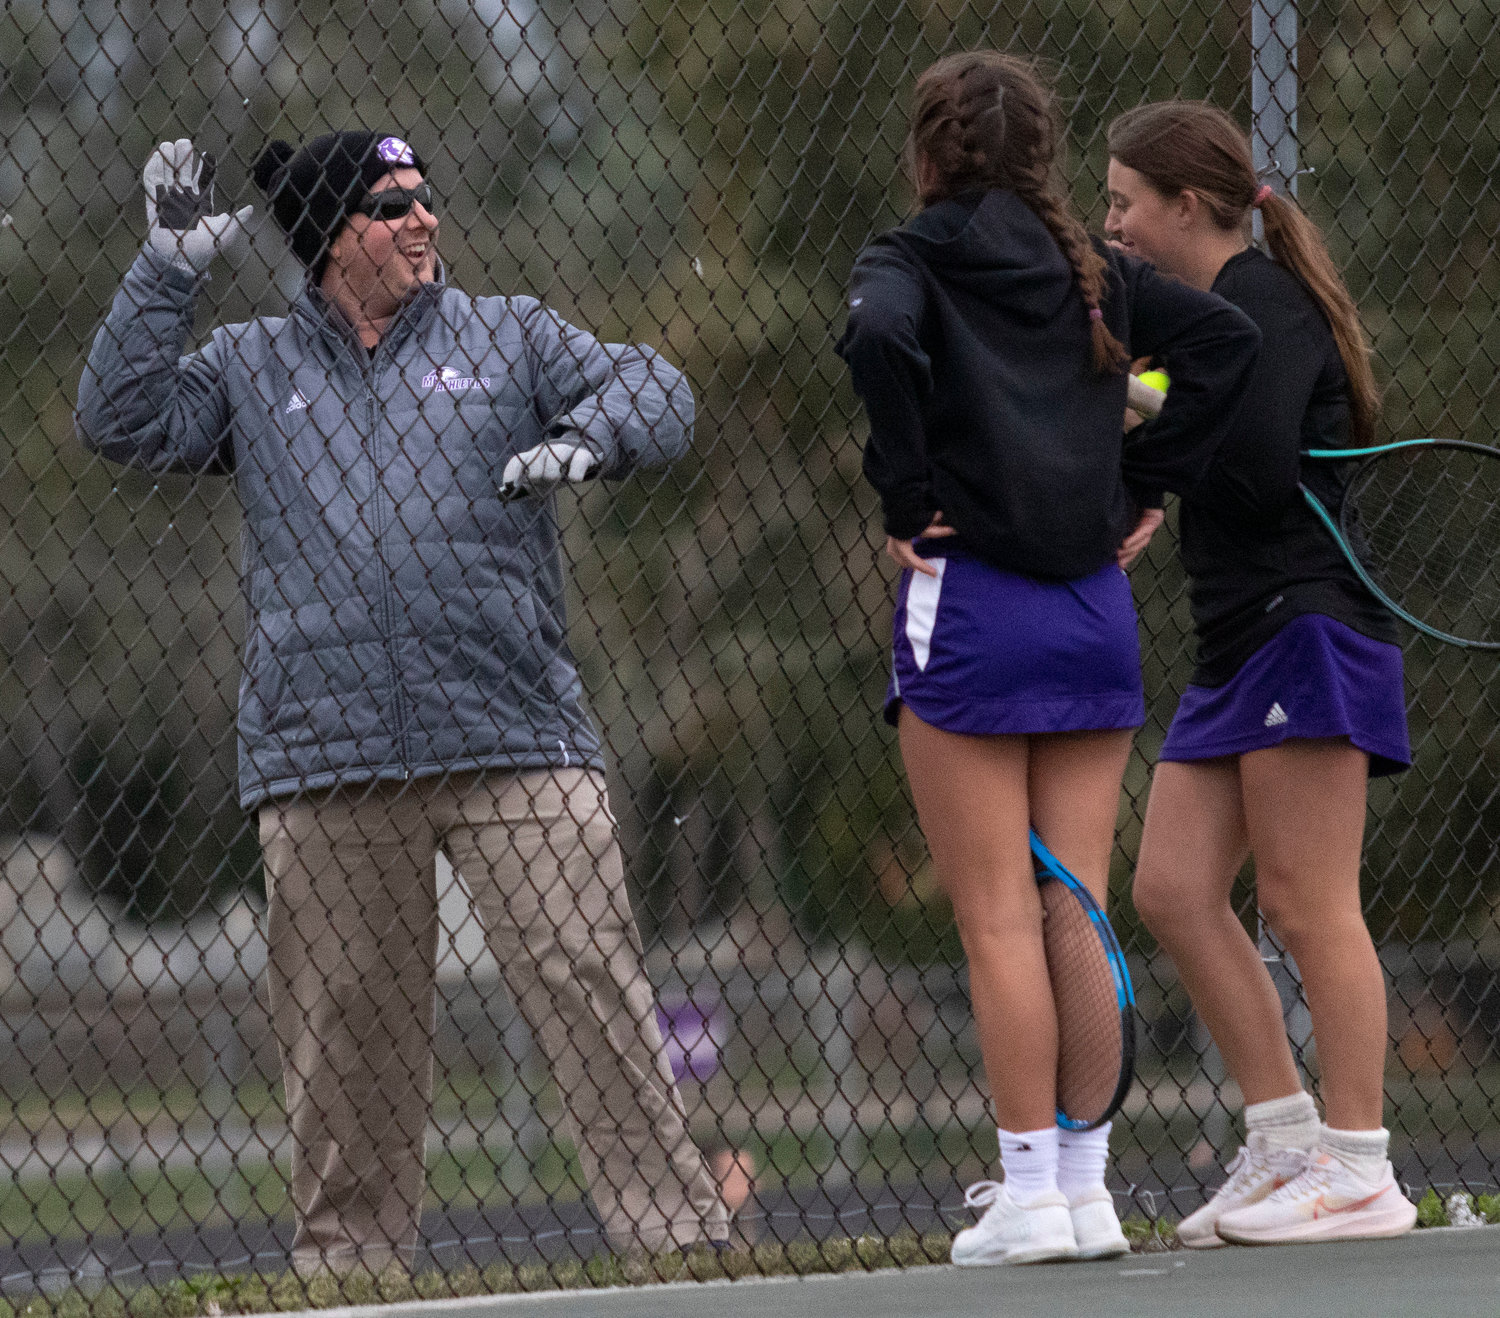 Head coach Geoff Keegan speaks to a doubles team during their match against Barrington on Monday. He has kept the team upbeat and positive as they compete in Division I.